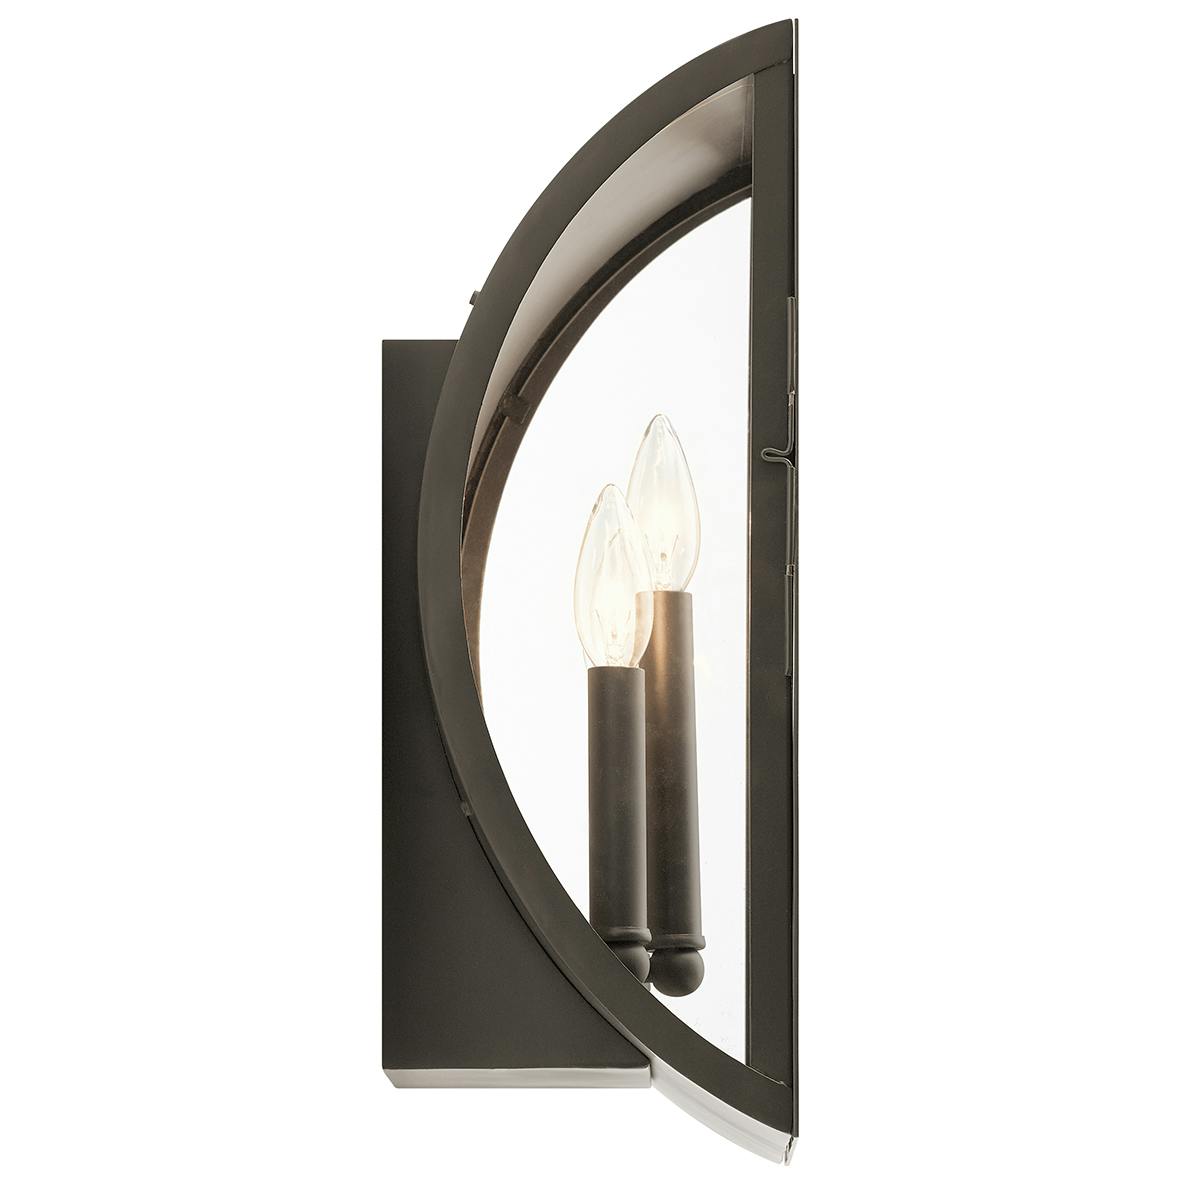 Profile view of the Narelle 17" Wall Light Olde Bronze on a white background